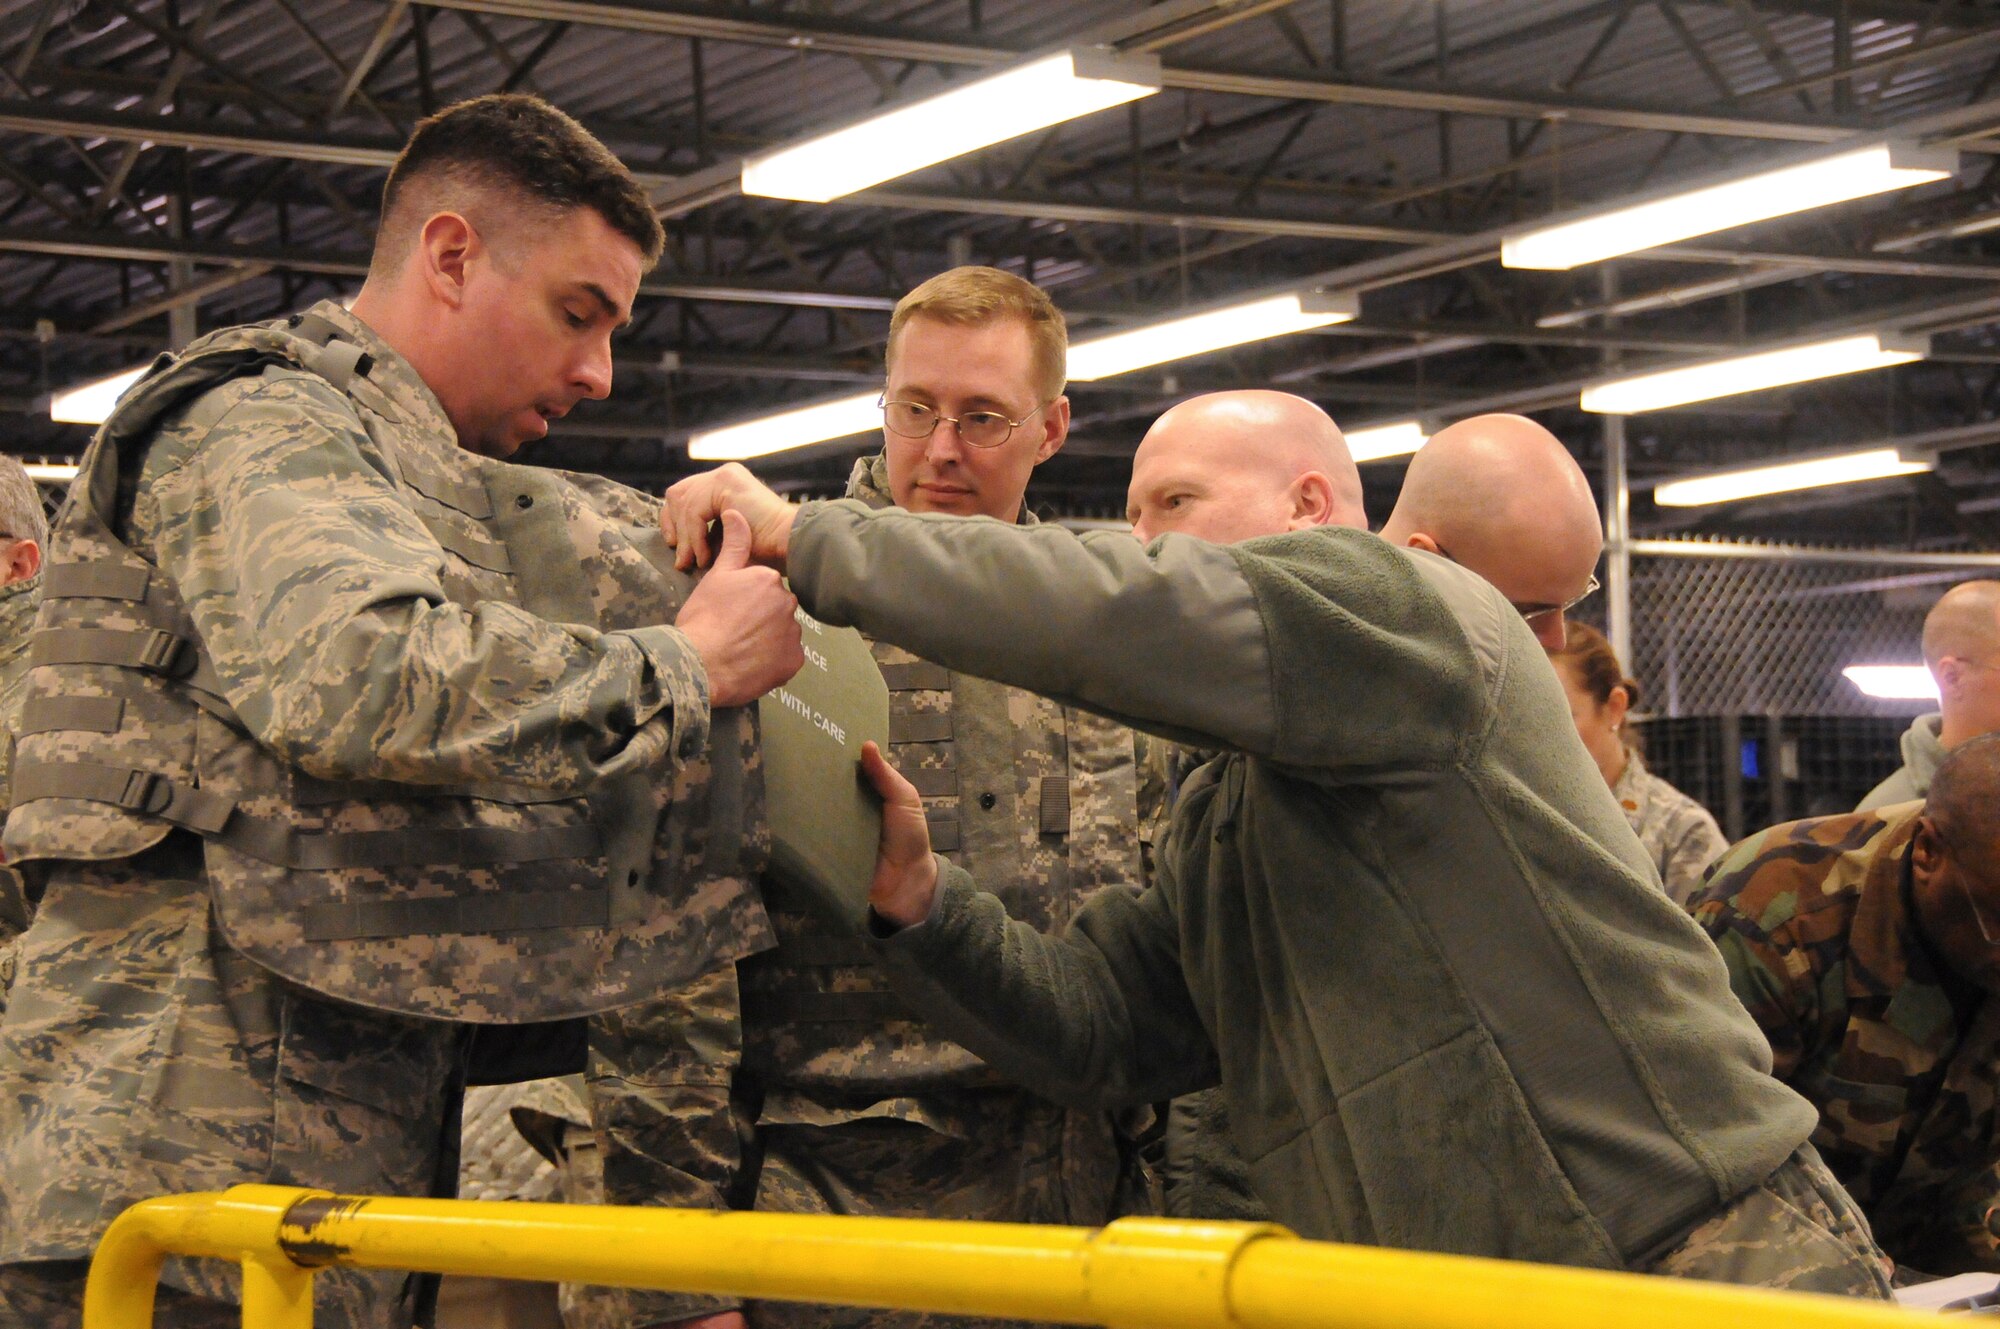 Members of the 123rd Airlift Wing are issued body armor Jan. 21, 2010, at the Kentucky Air National Guard Base in Louisville, Ky., in preparation for a flight to the Dominican Republic on Jan. 22, 2010, as part of earthquake relief efforts in Haiti. Three C-130s and approximately 45 Kentucky Air National Guardsmen are deploying to establish an air cargo hub at Maria Montez International Airport that will be responsible for controlling incoming aircraft, offloading relief supplies and staging them for further movement into Haiti. (U.S. Air Force photo by Tech. Sgt. Dennis Flora)